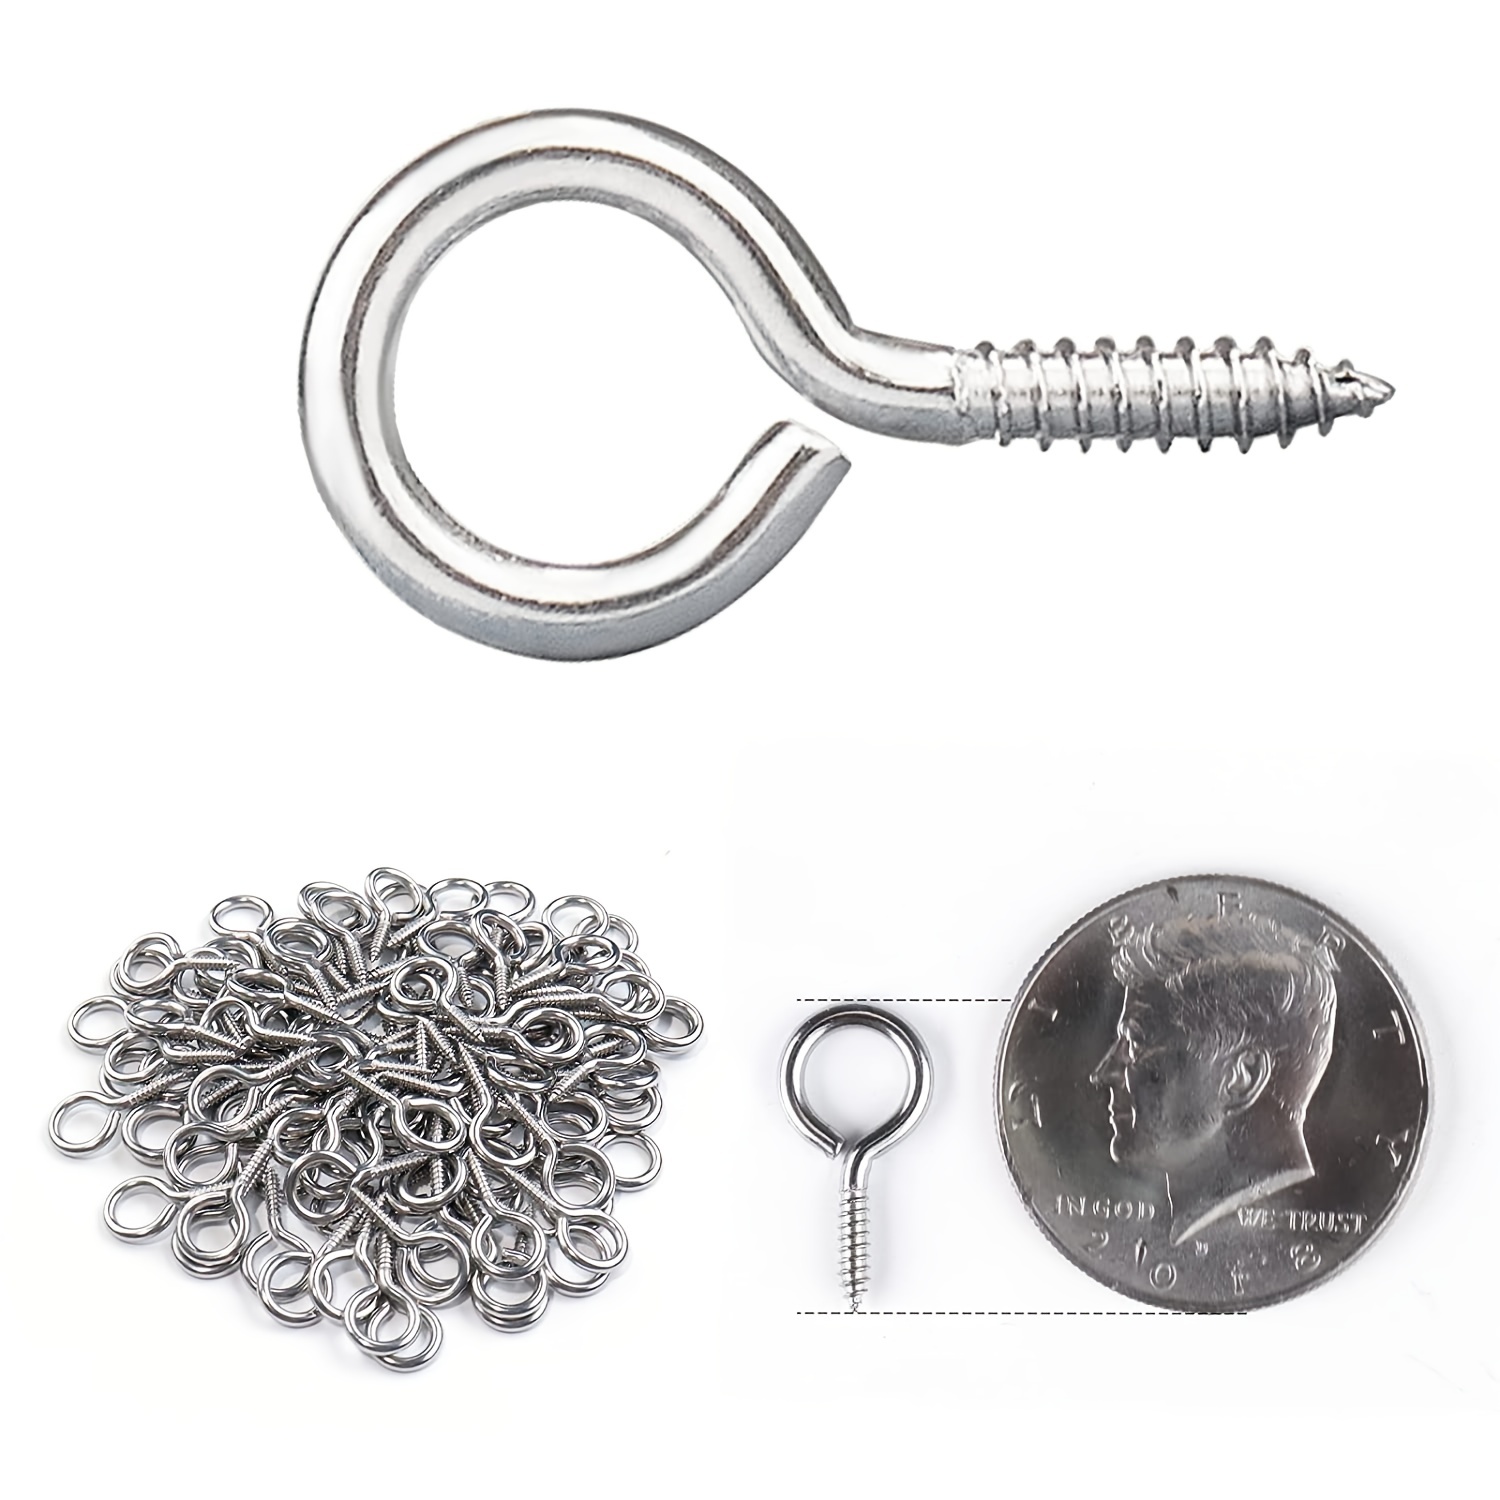 100Pcs 0.67 Inches Stainless Steel Eye Screws, Heavy Duty Screw, Eye Hooks  Screw Eye Bolts Eye Hooks Screw